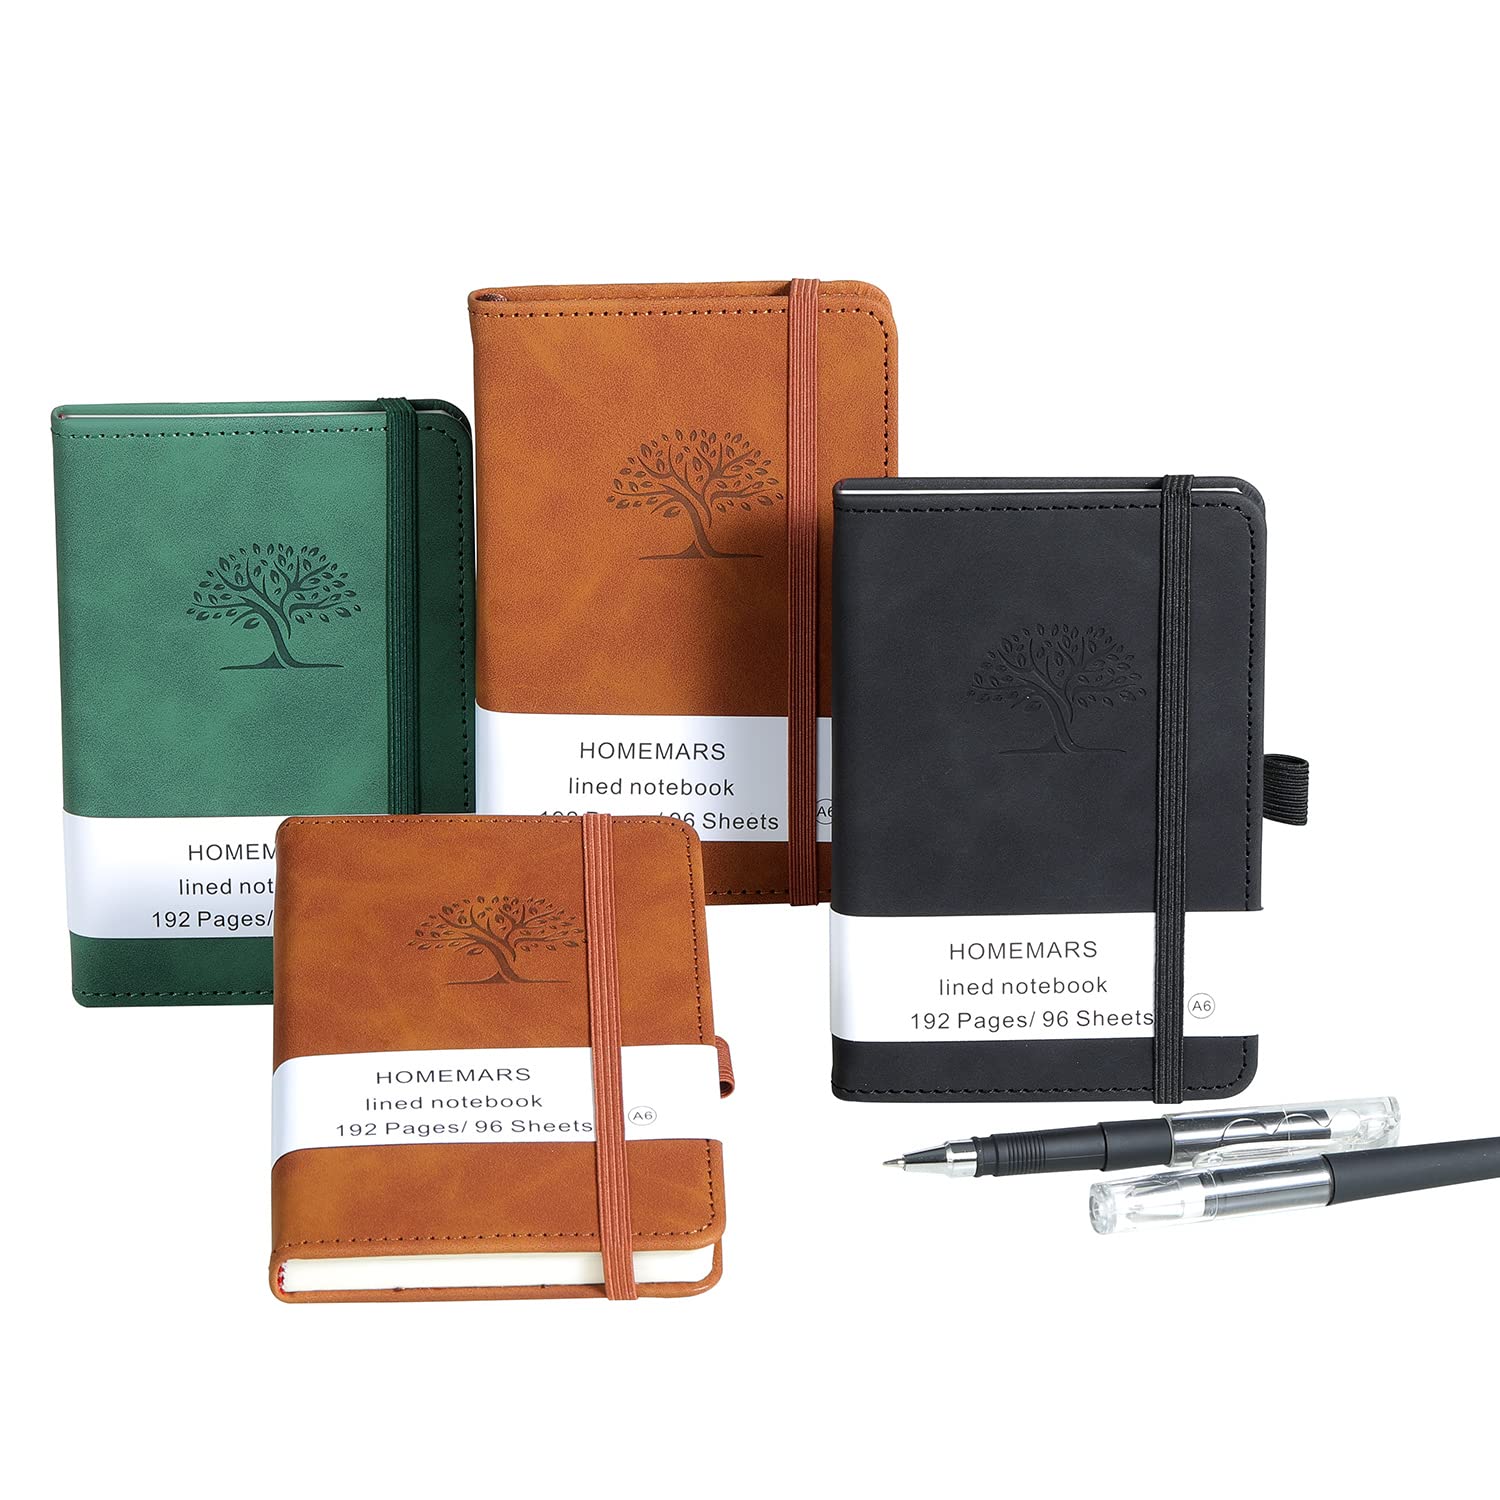 HOMEMARS Pocket Notebook, Small Notebook, 3 Pack, Pocket Notepad,14.4 cm x 9.6cm, A6 Notebook, Small Notepad, Brown, Green, Black, 192 Pages Each, Hardcover, Embossing Tree Design, Lined Paper